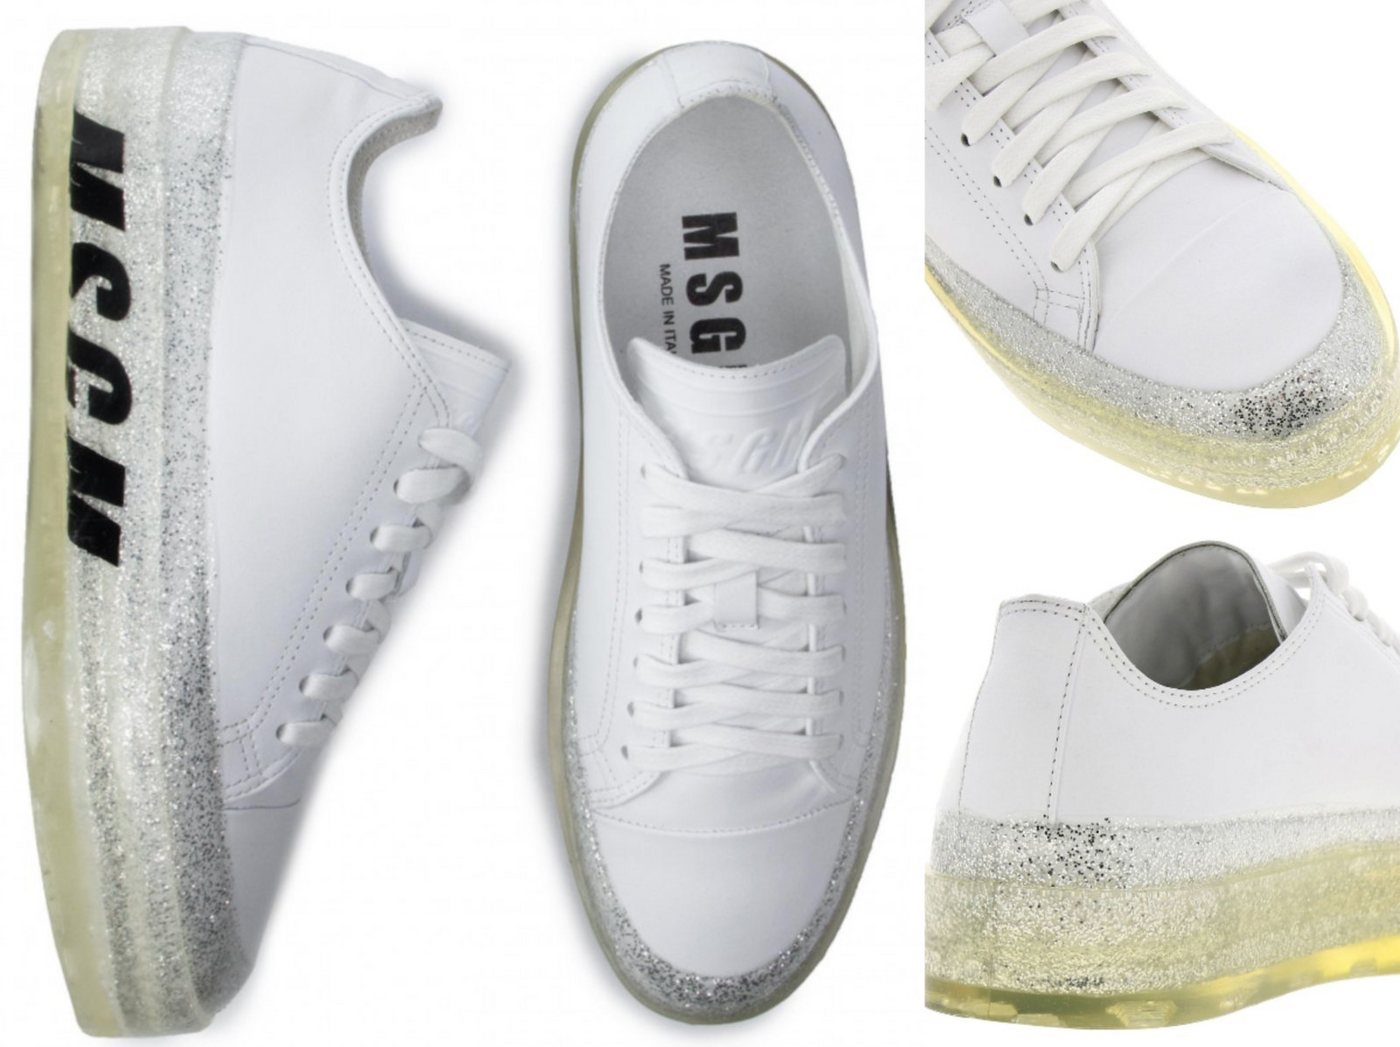 MSGM MSGM RBRSL Rubber Soul Edition Floating Sneakers Turnschuhe Shoes Schu Sneaker von MSGM